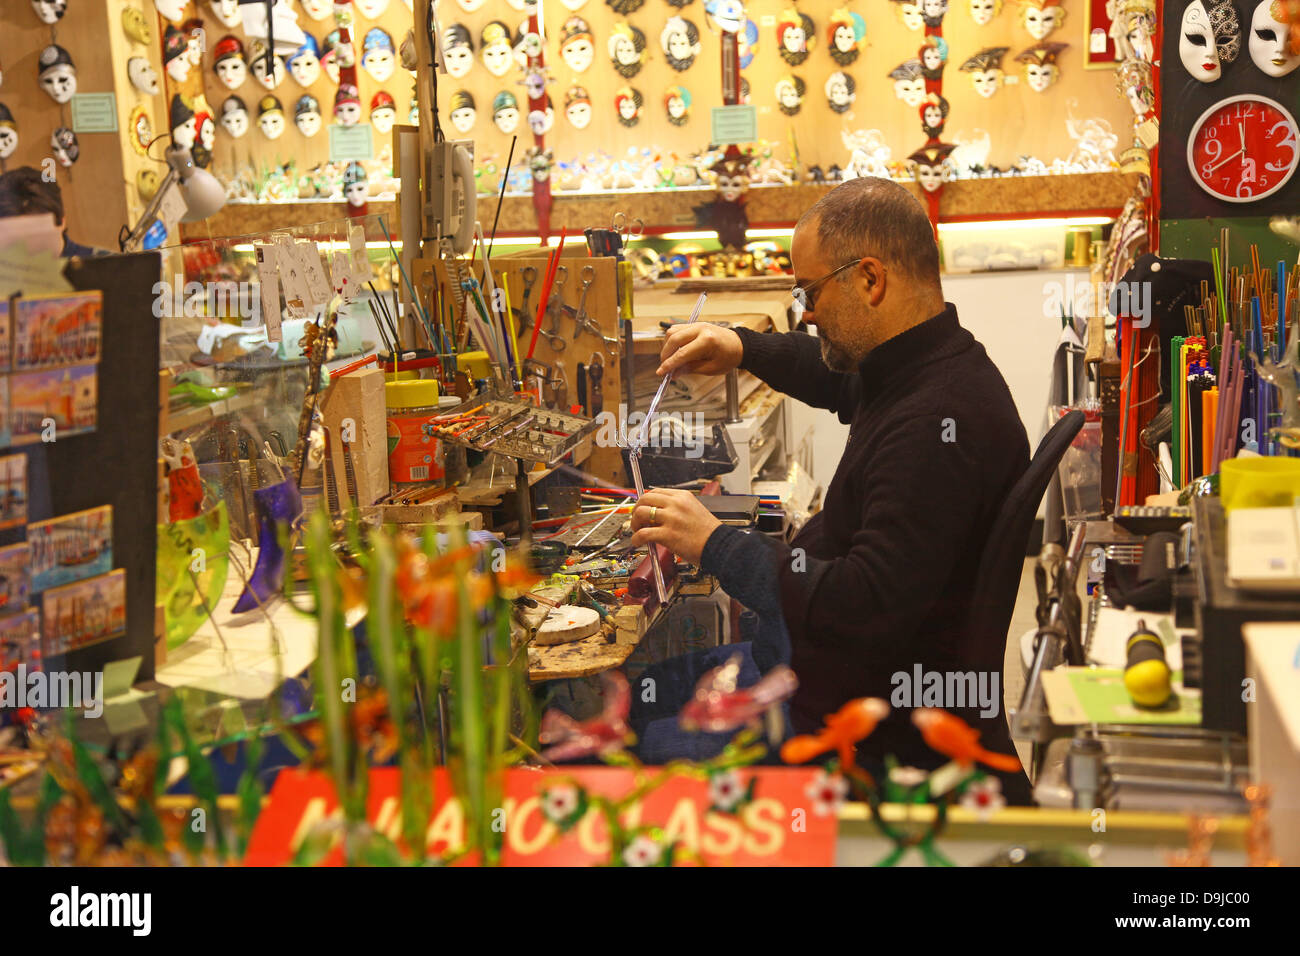 A man in a glass shop making a glass ornament  Murano Venice Italy Stock Photo